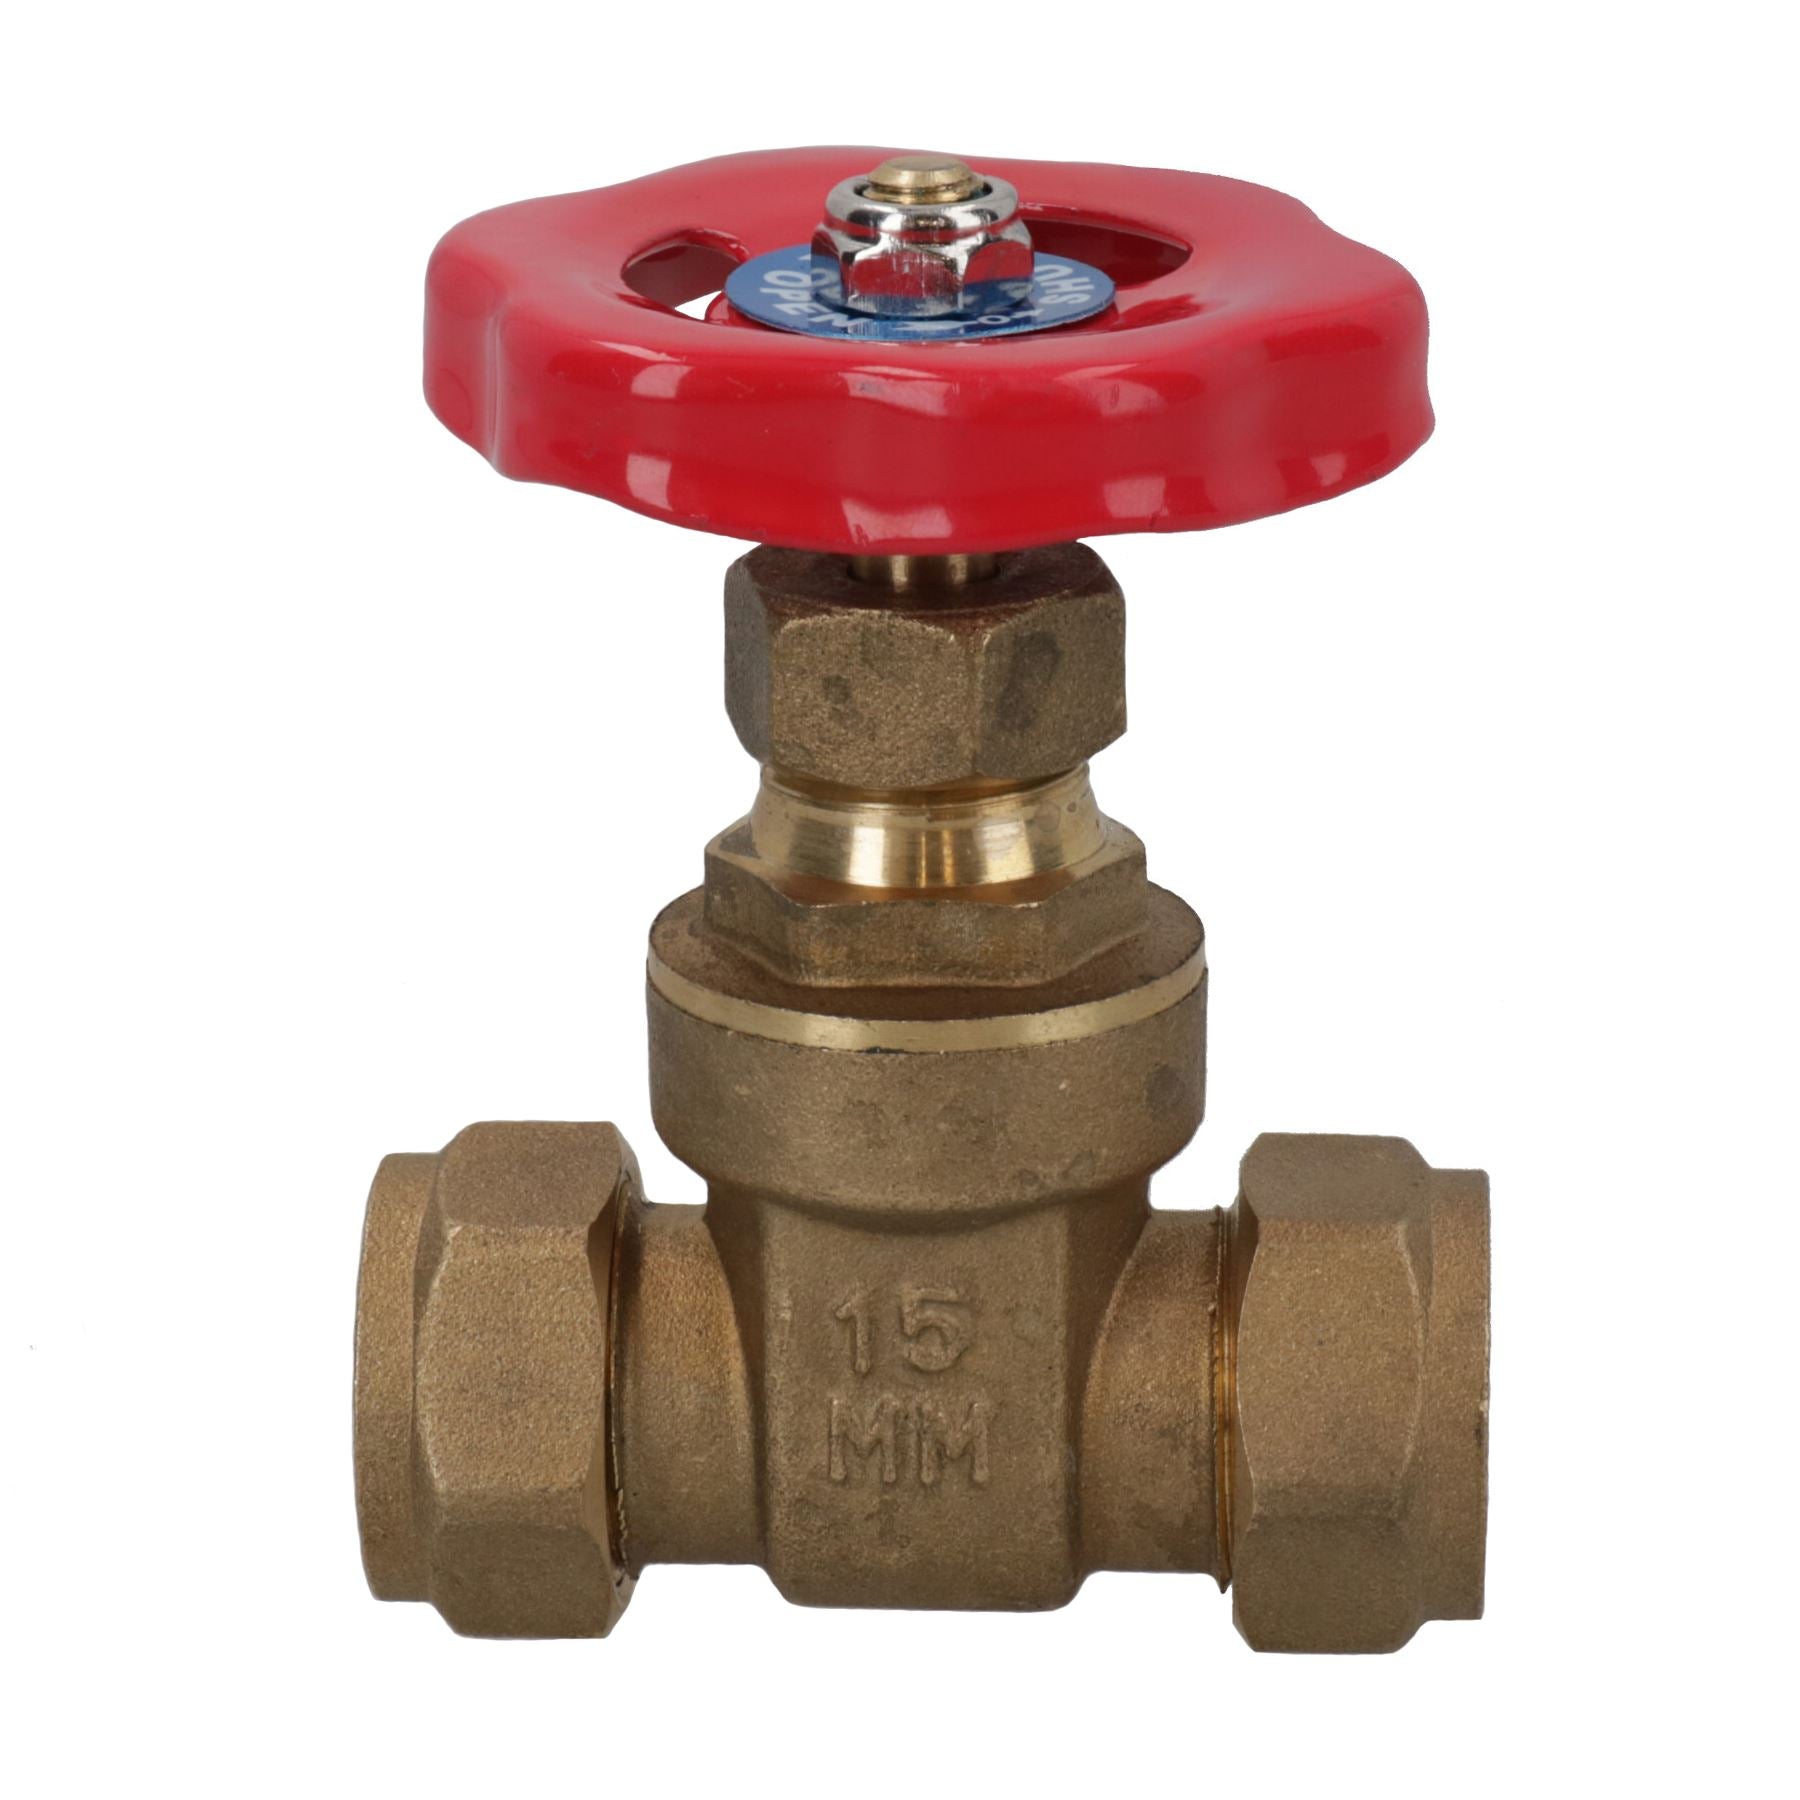 15mm Copper Pipe Gas Valve Isolator Turn On Off Gas Cock Plumbing Connector